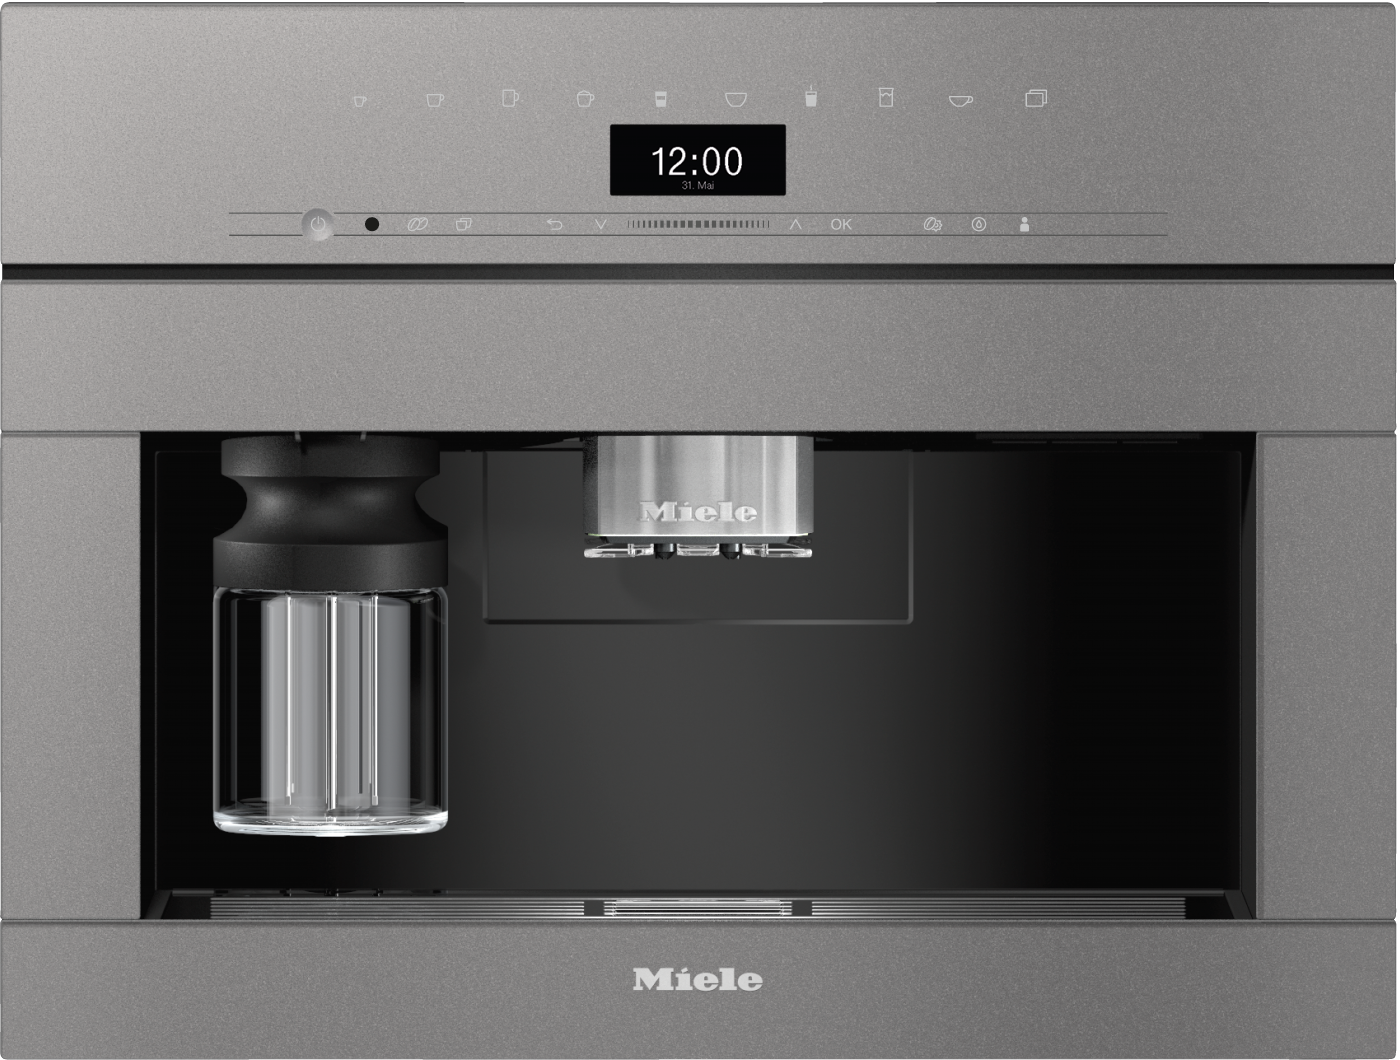 CVA 7440Built-in coffee machine In a perfectly combinable design with patented CupSensor for perfect coffee.